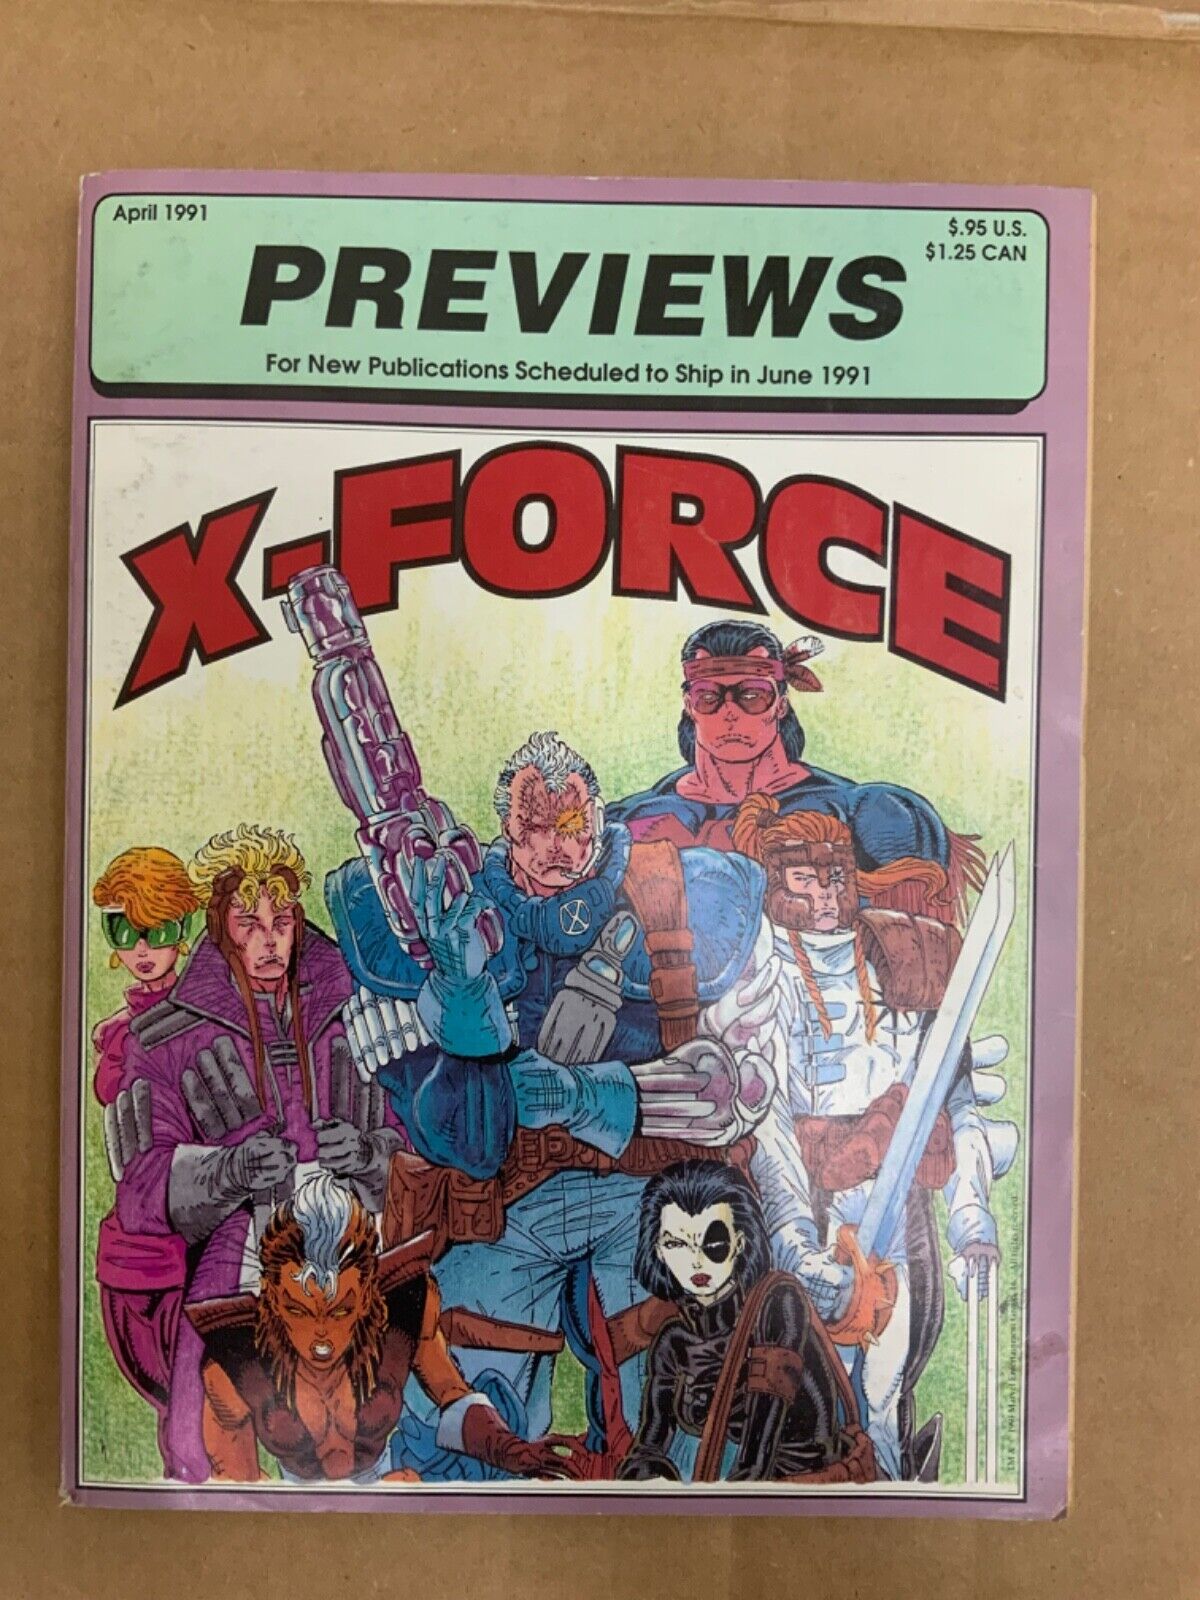 PREVIEWS MAGAZINE April 1991 X-Force and Marvel Cards Insert VF-